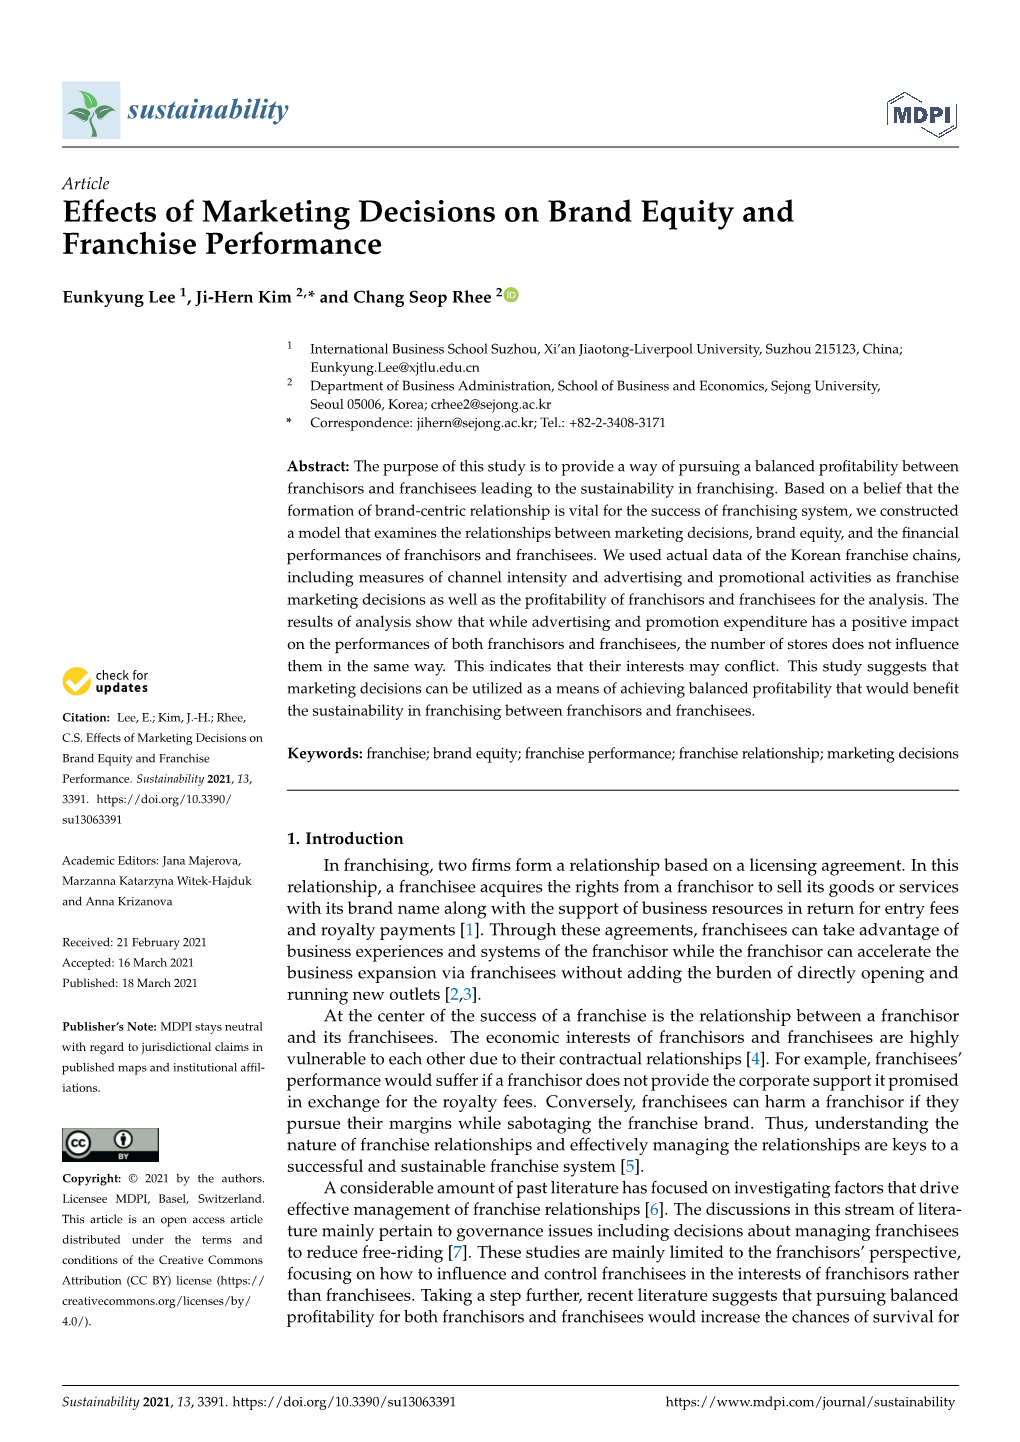 Effects of Marketing Decisions on Brand Equity and Franchise Performance